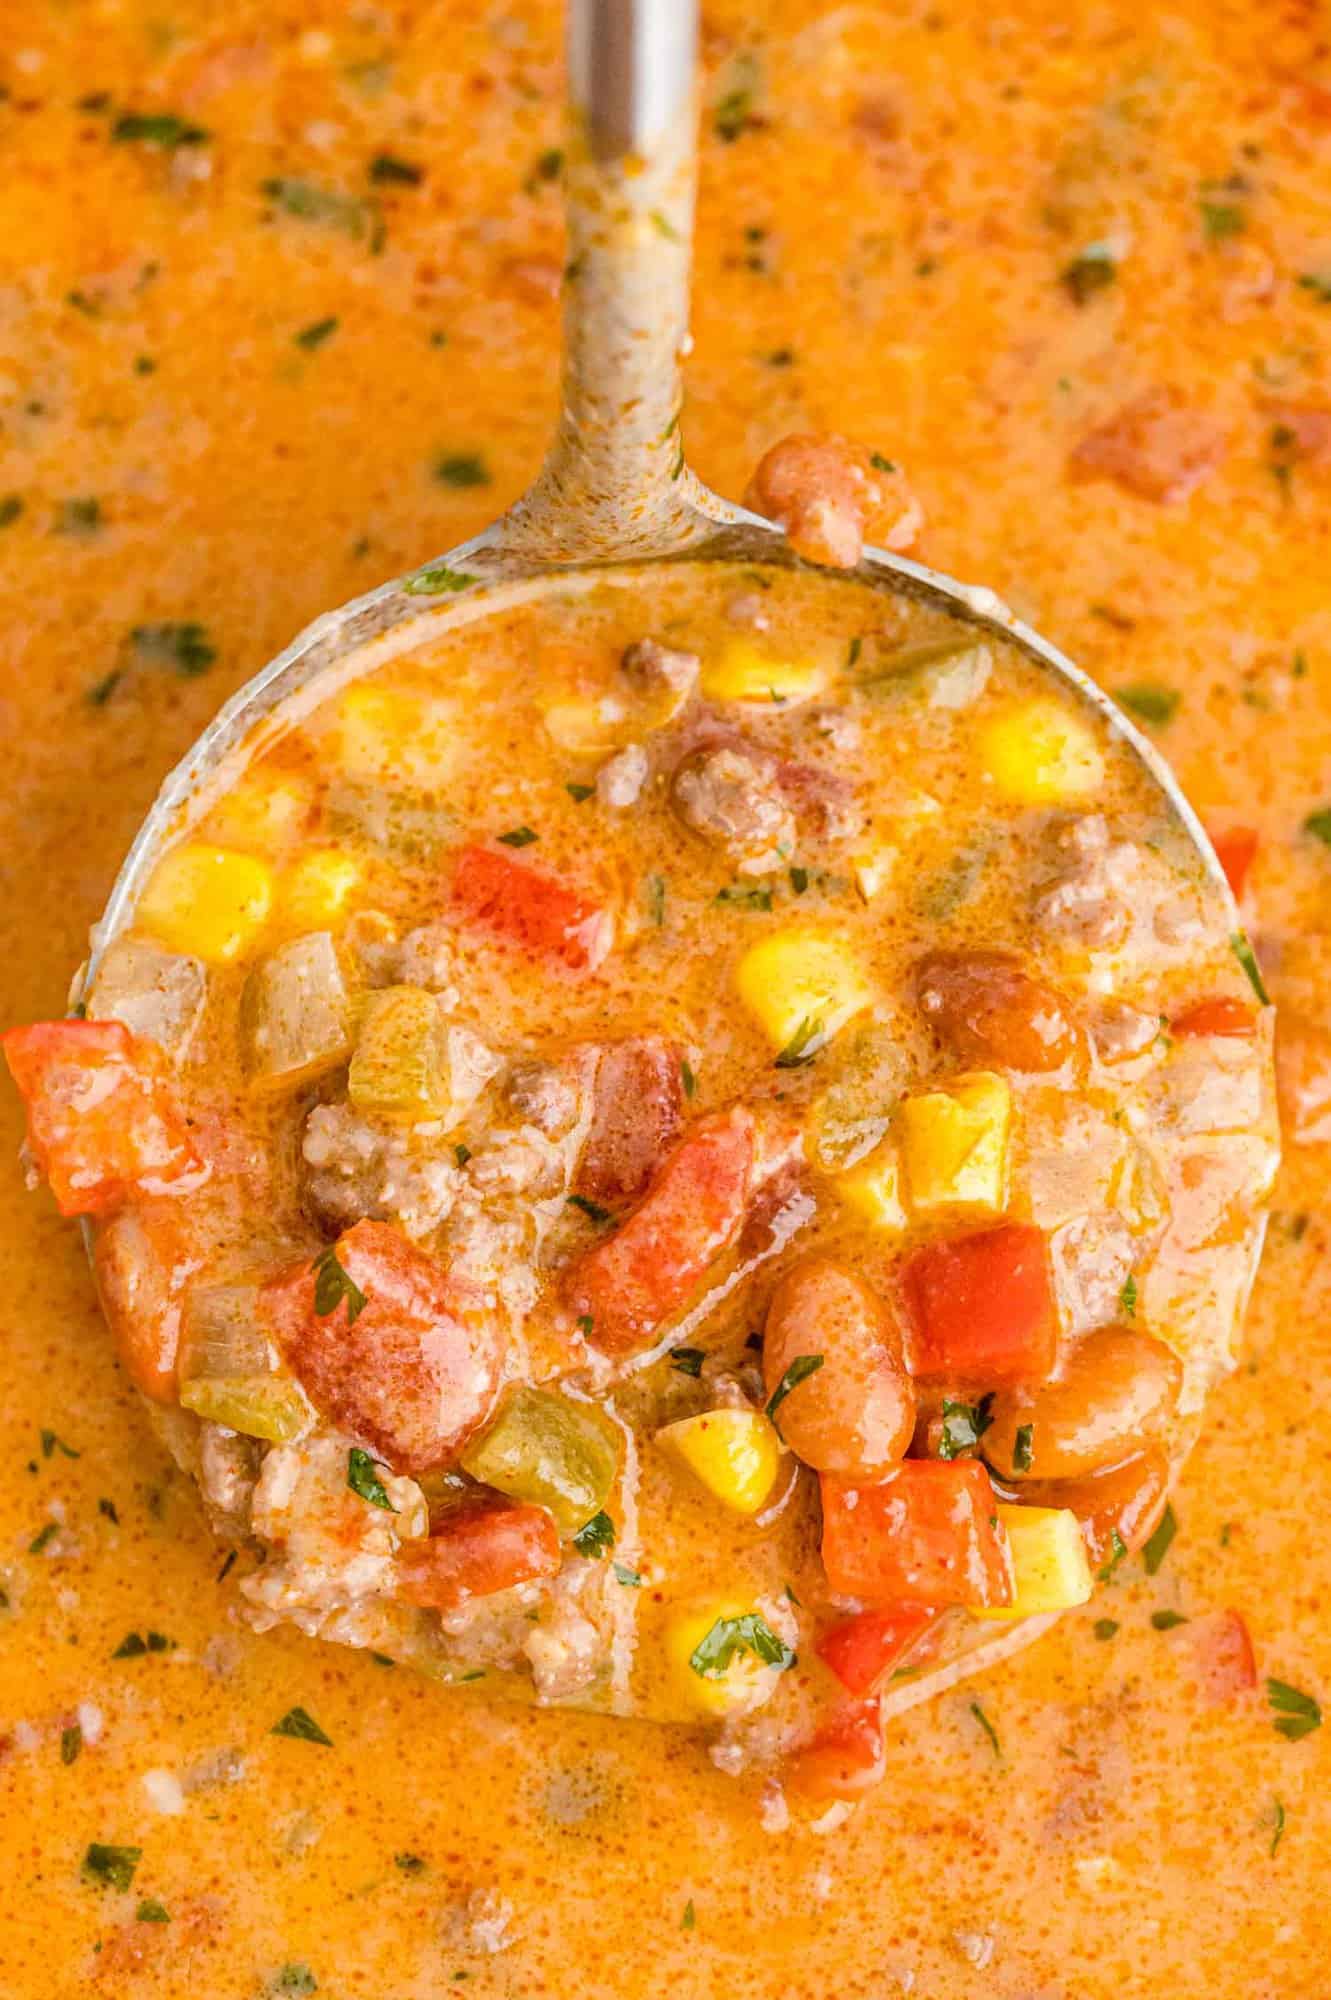 Creamy chili on a ladle, showing beans, red peppers, corn and more.